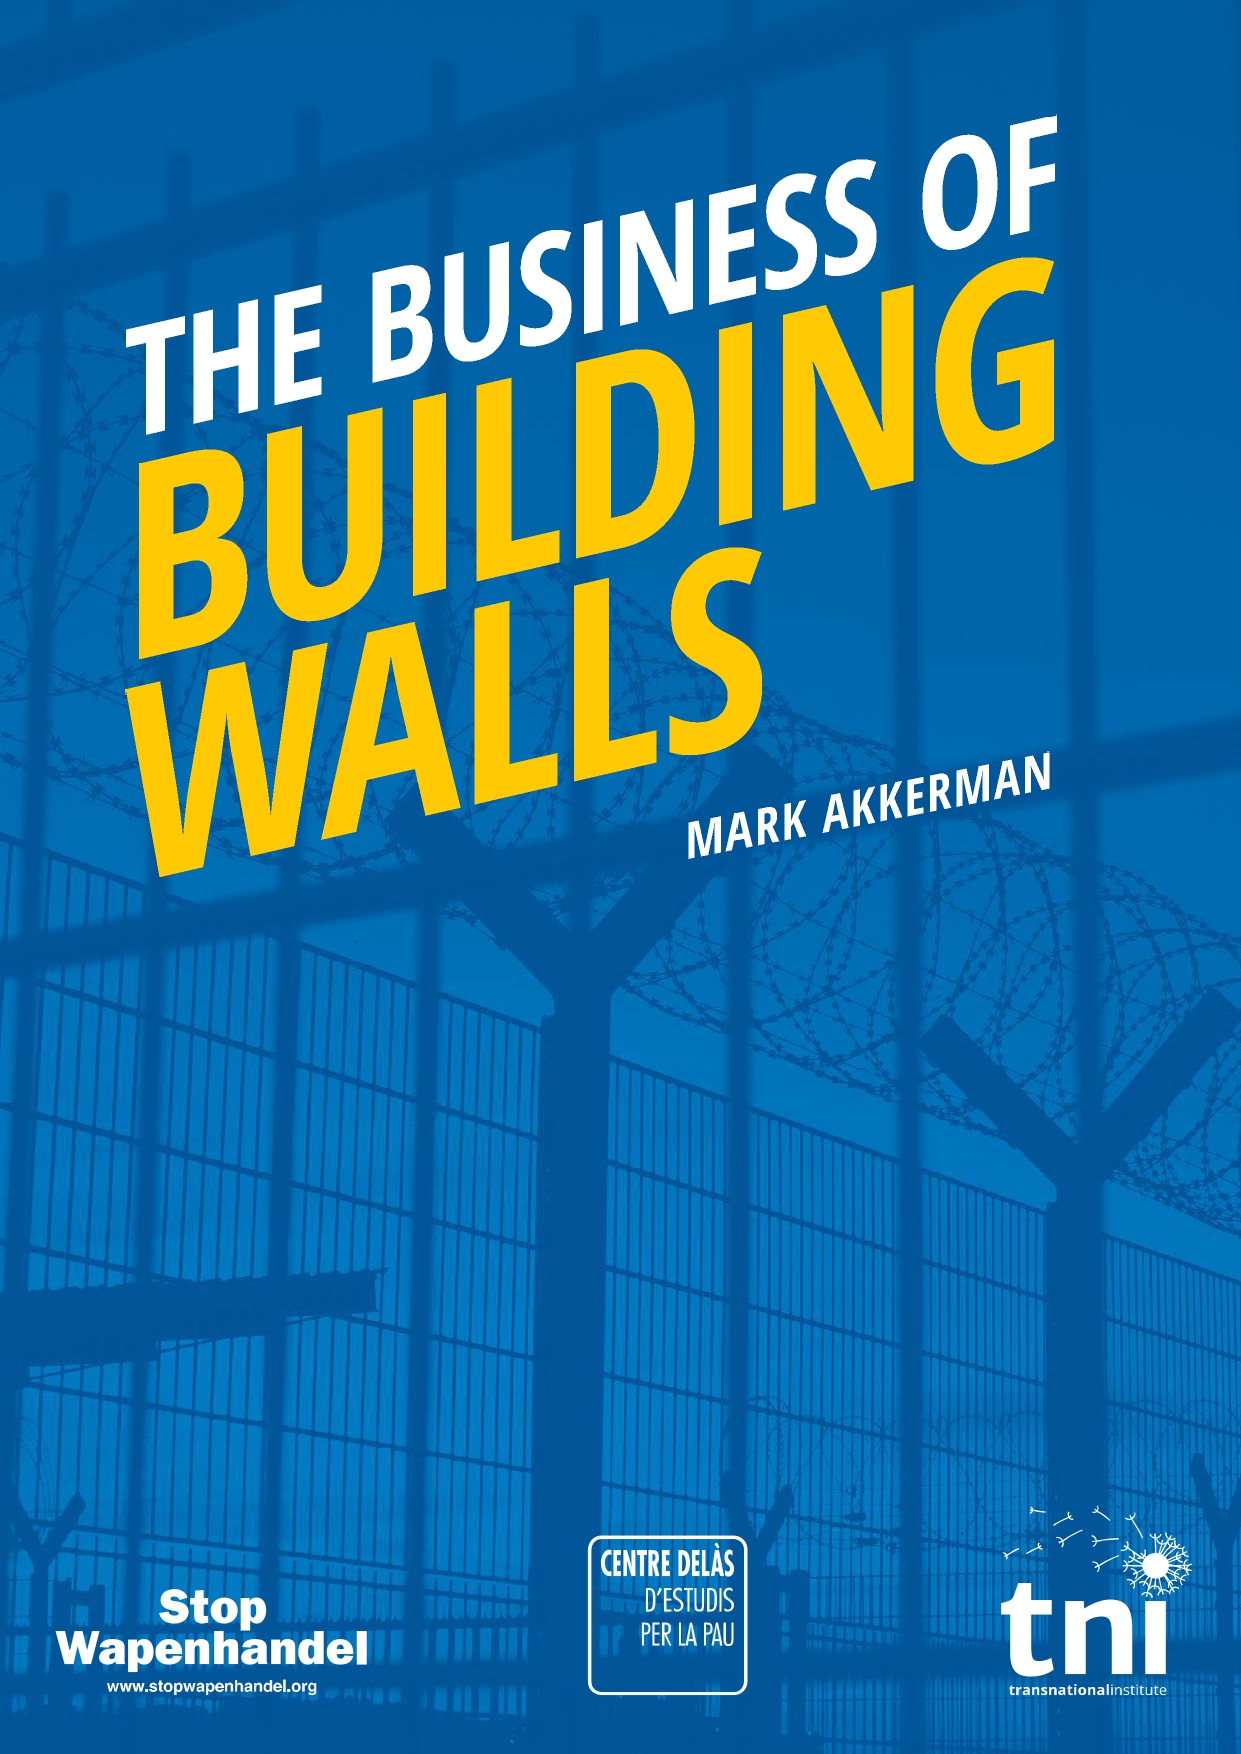 Transnational Institute, Stop Wapenhandel and Centre Delàs report: “The Business of Building Walls”